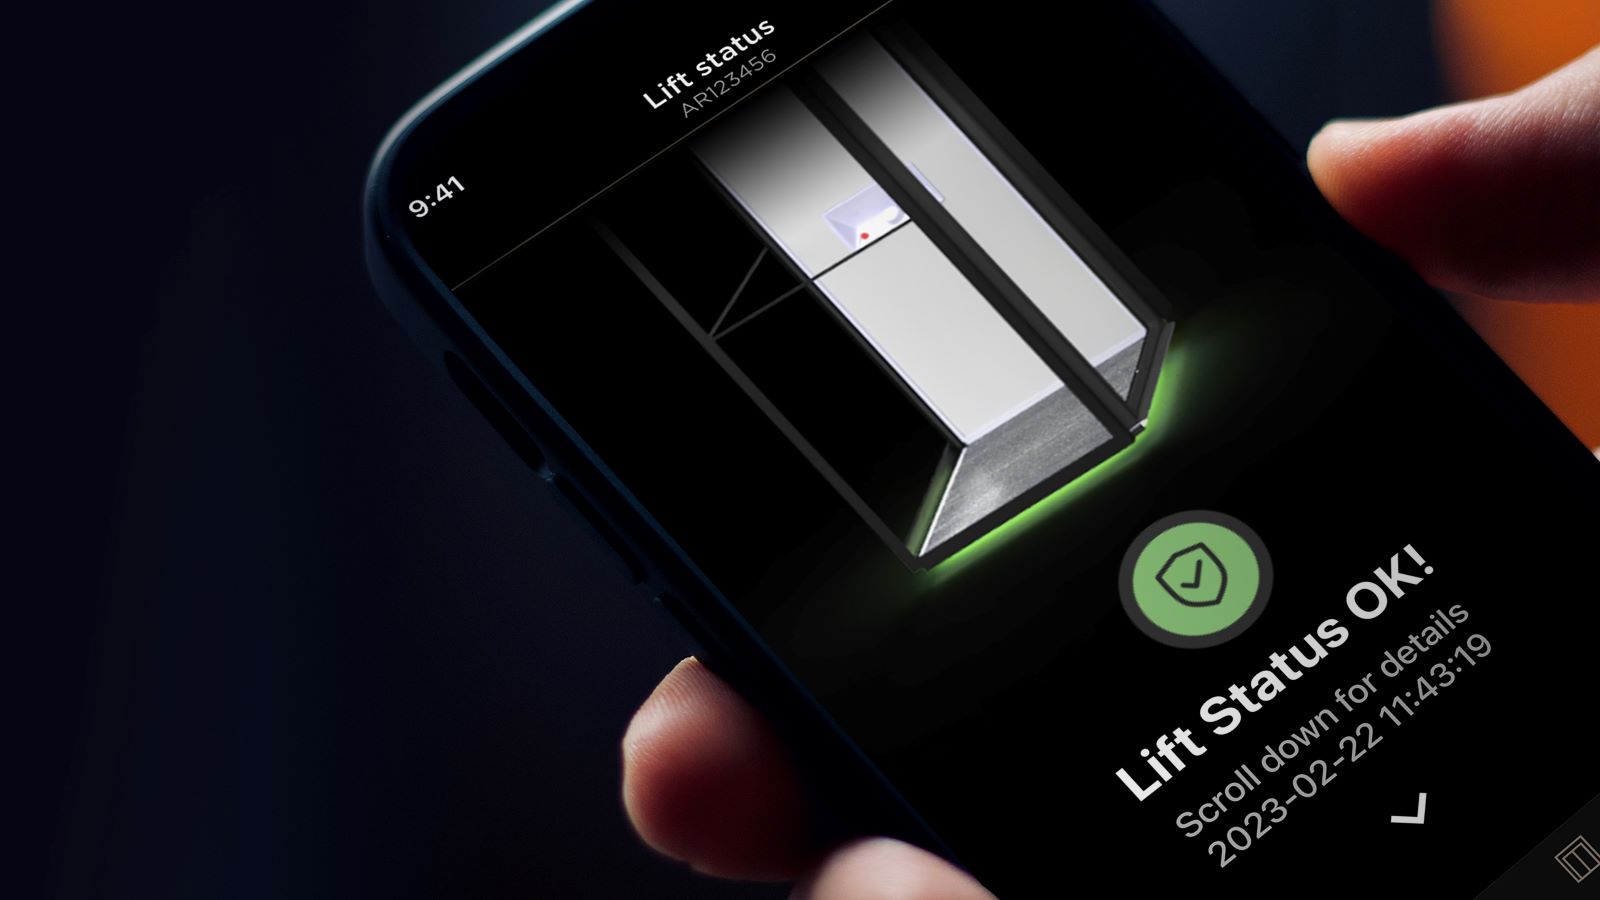 Hand holdning a smartphone with Aritco SmartLift App showing lift status.